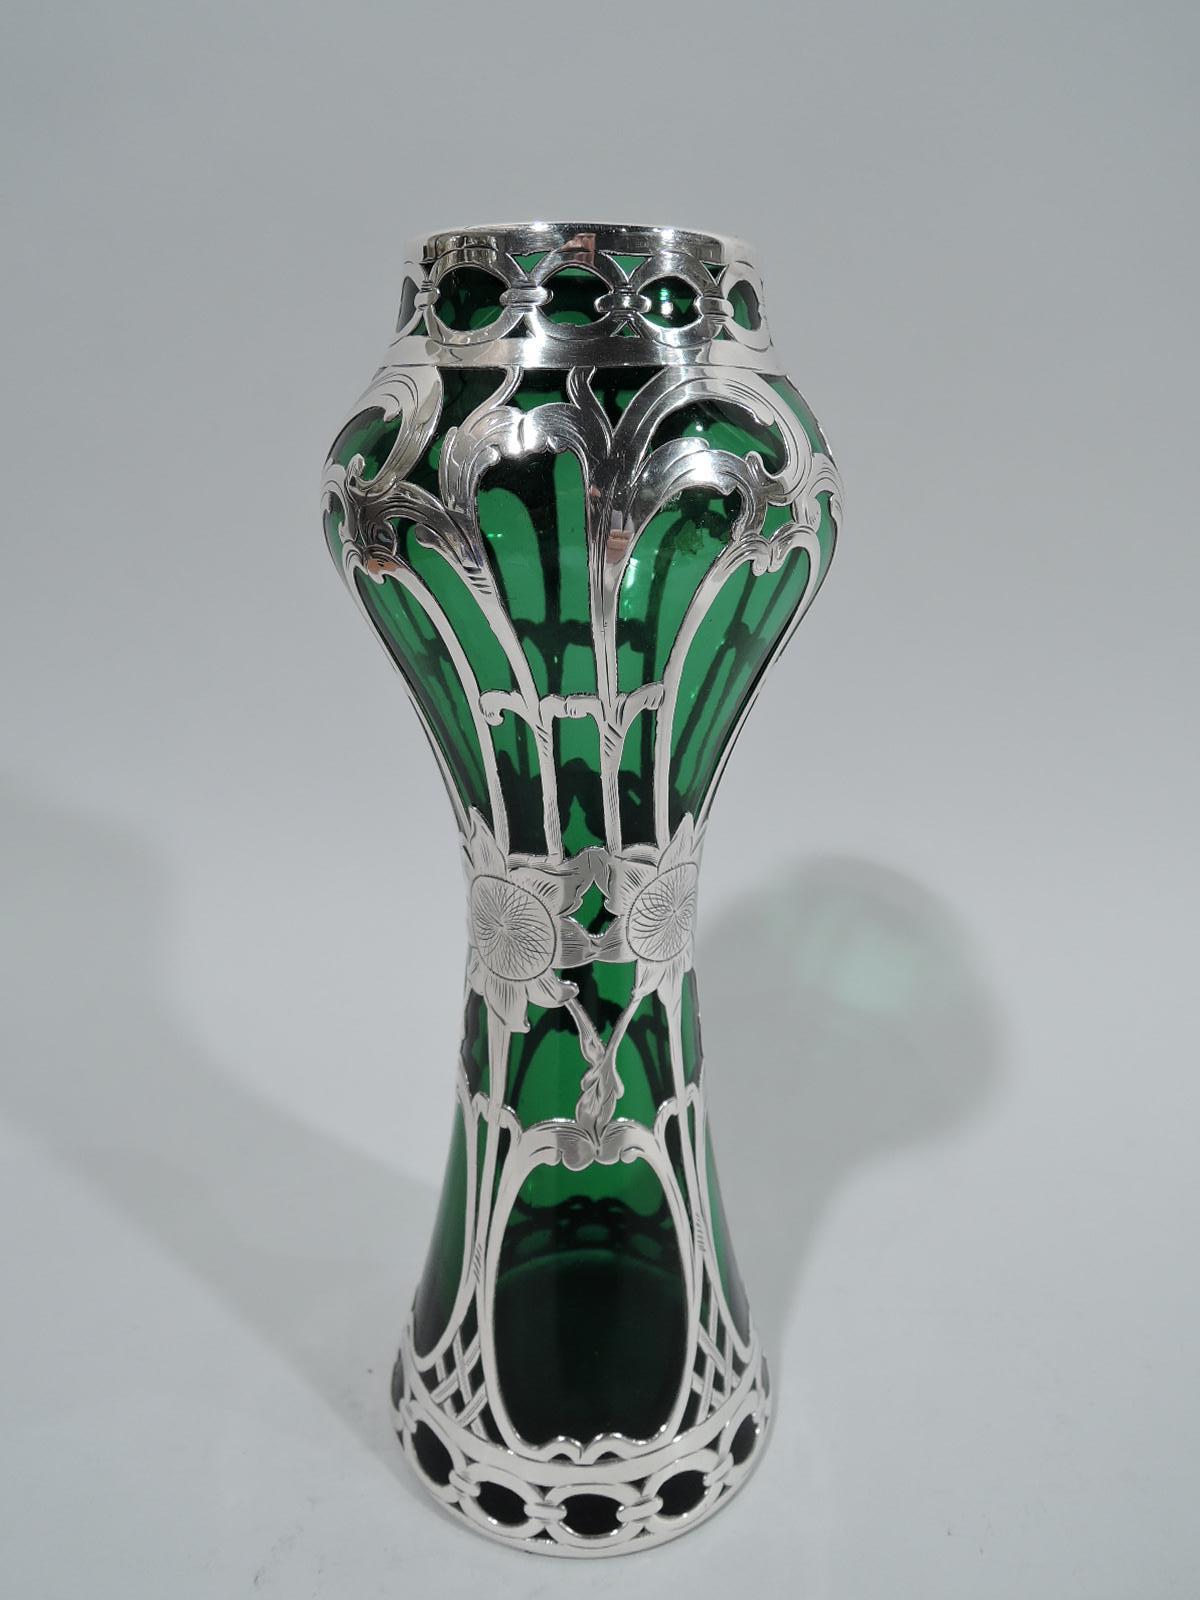 Turn-of-the-century Art Nouveau glass vase with engraved silver overlay. Waisted center with curved shoulder and conical base. Vertical overlay with scrolling tendrils and sunflower-head girdle. Top and bottom have guilloche borders. Glass is green.